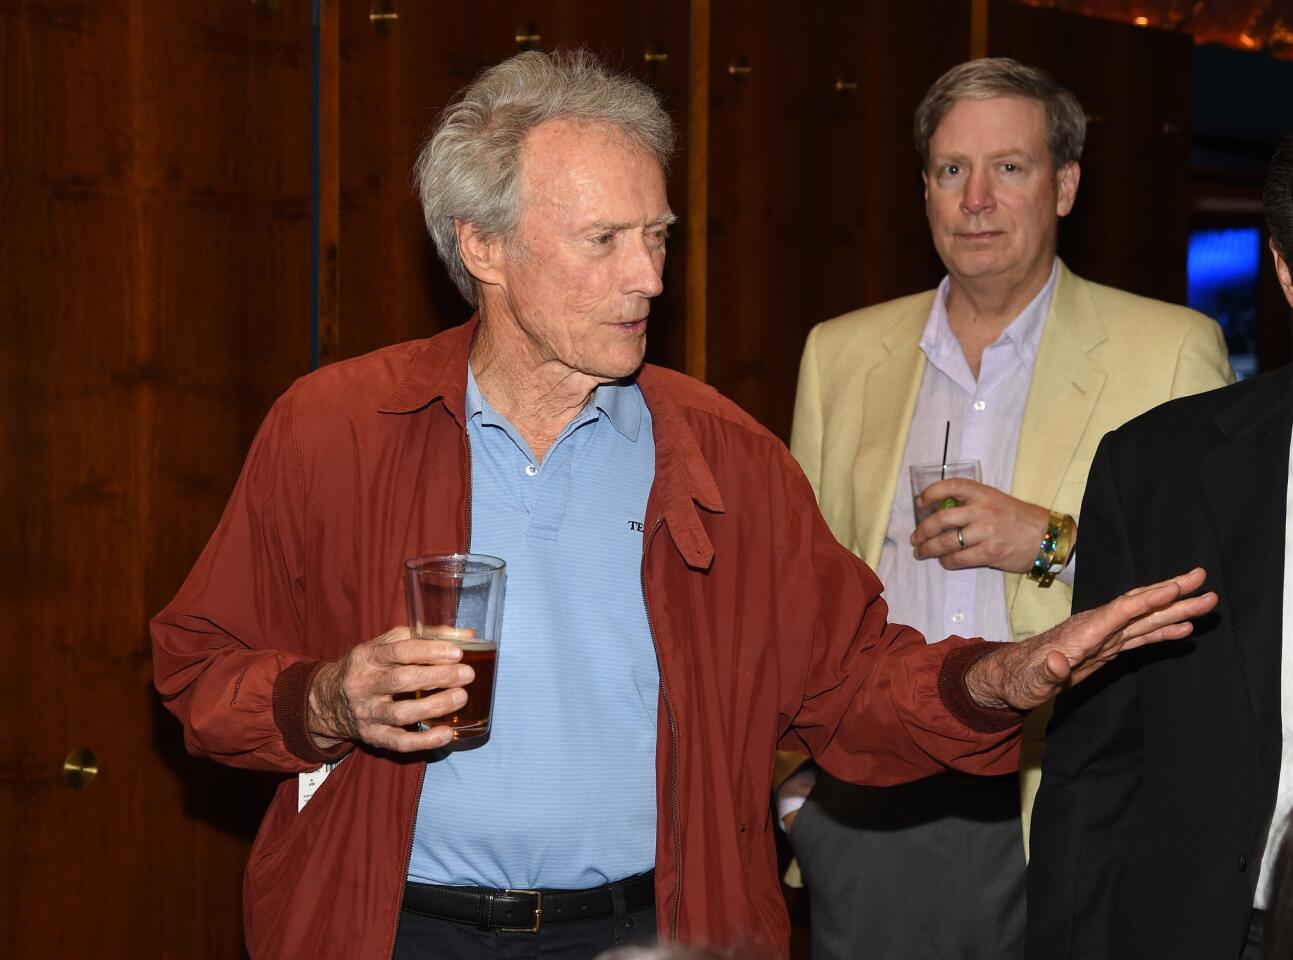 Actor and director Clint Eastwood, left, attends the Showtime VIP post-fight dinner at the MGM Grand Hotel & Casino in Las Vegas on Saturday night.